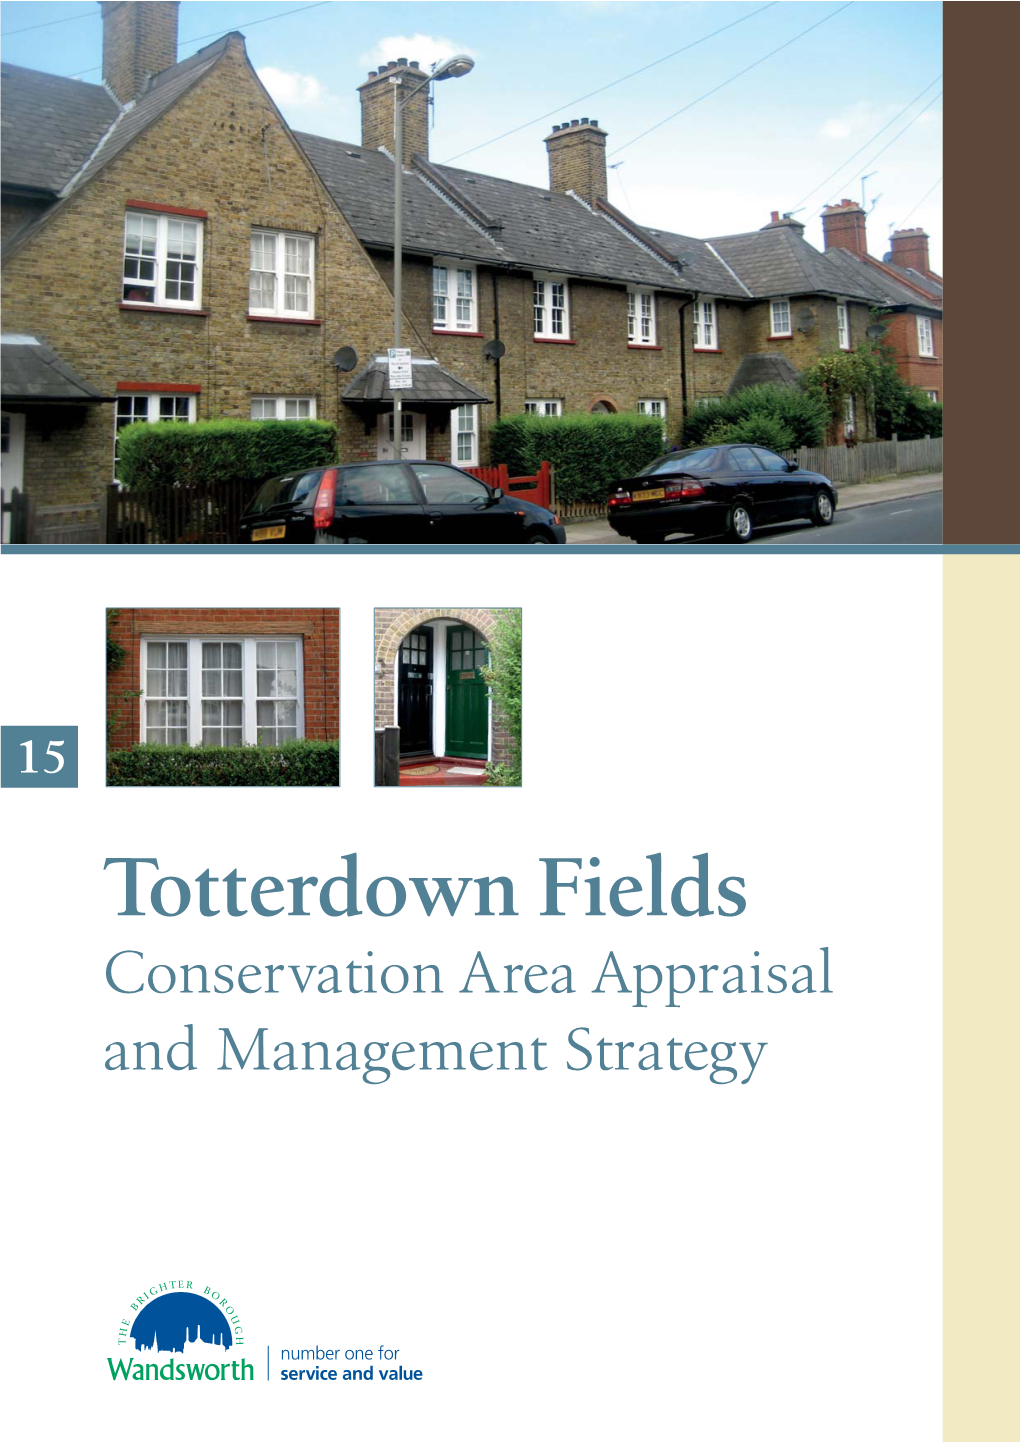 Totterdown Fields Conservation Area Appraisal and Management Strategy